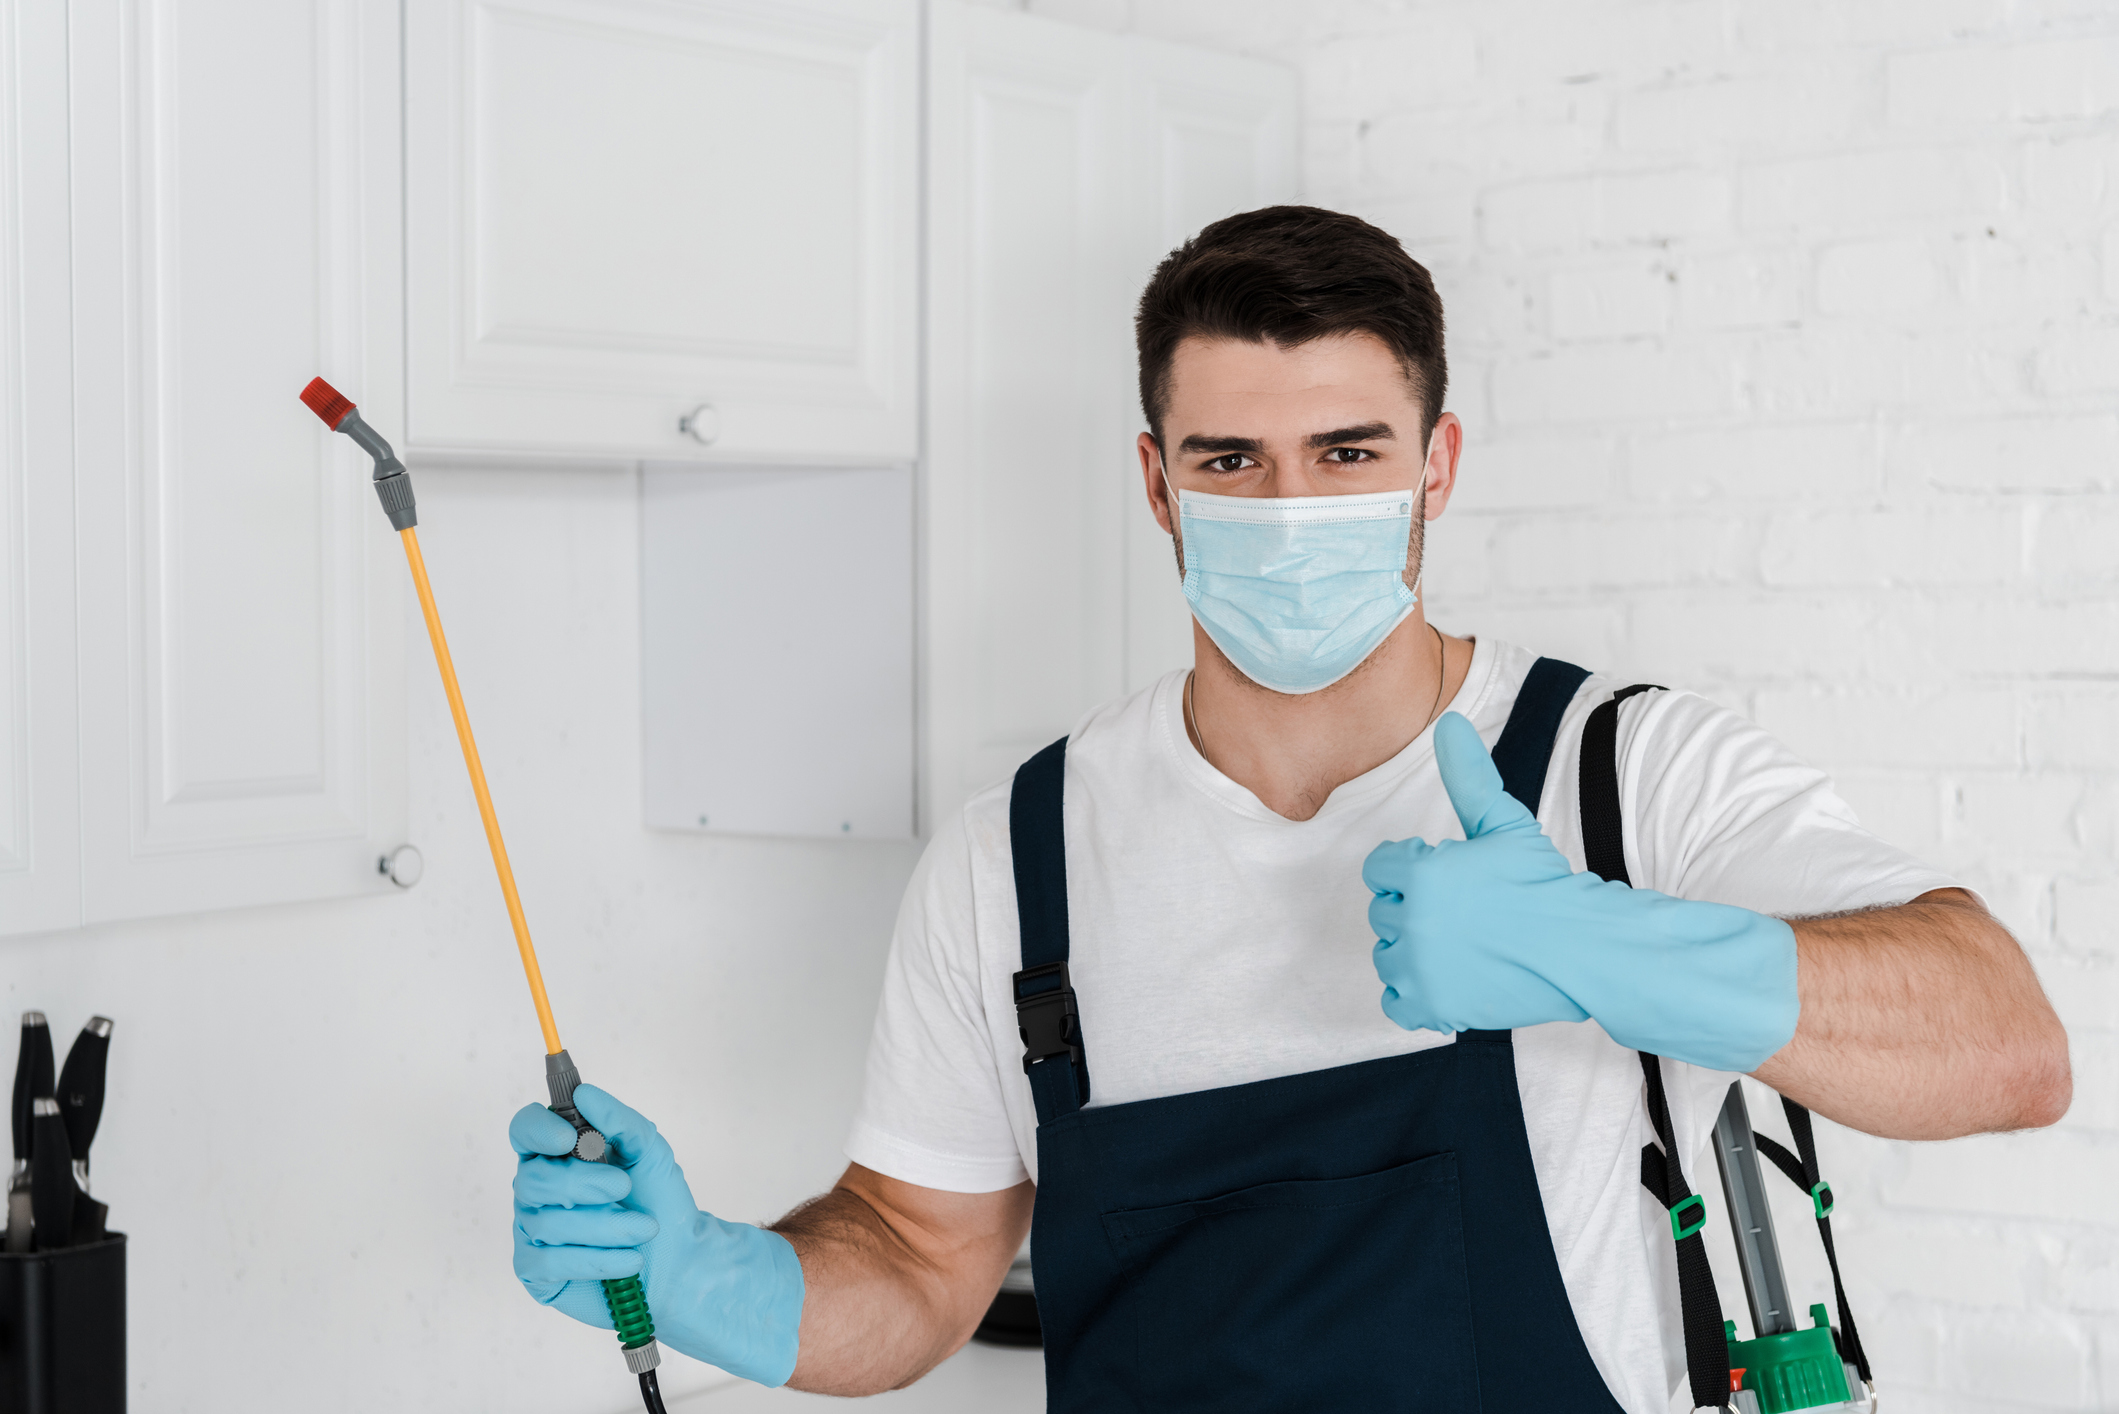 exterminator in uniform holding toxic spray and showing thumb up